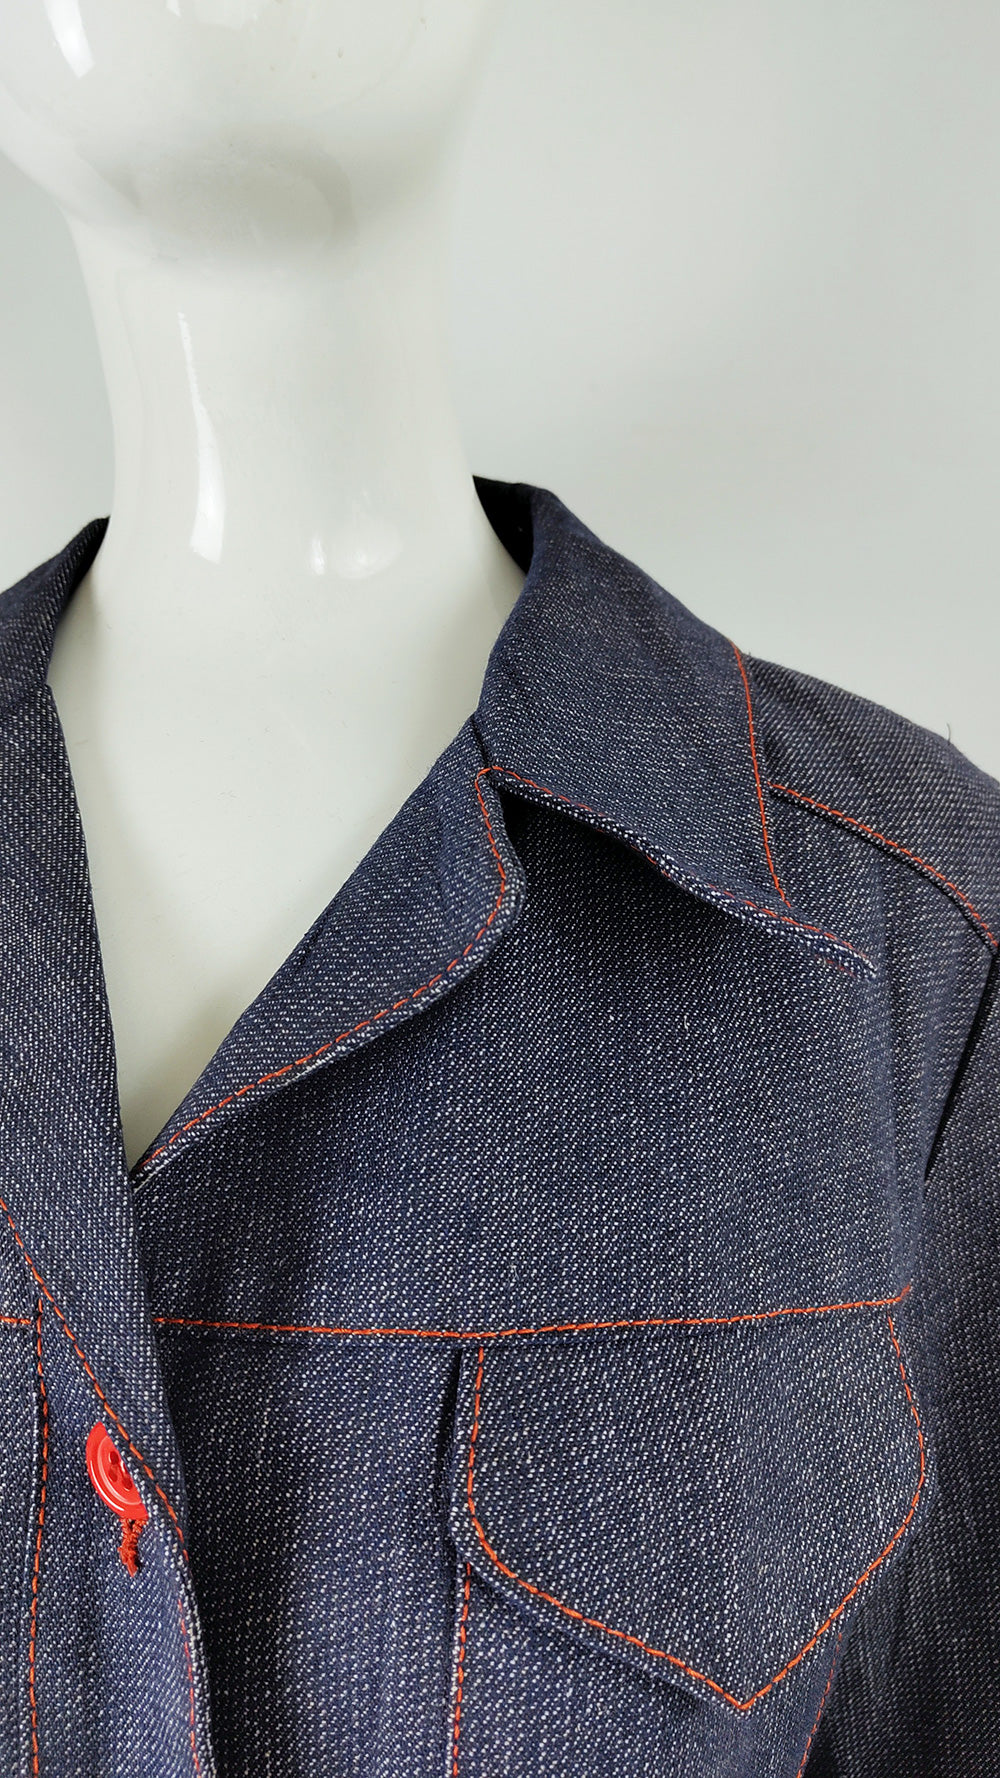 Vintage 70s Western Denim Jacket with Red Buttons, 1970s